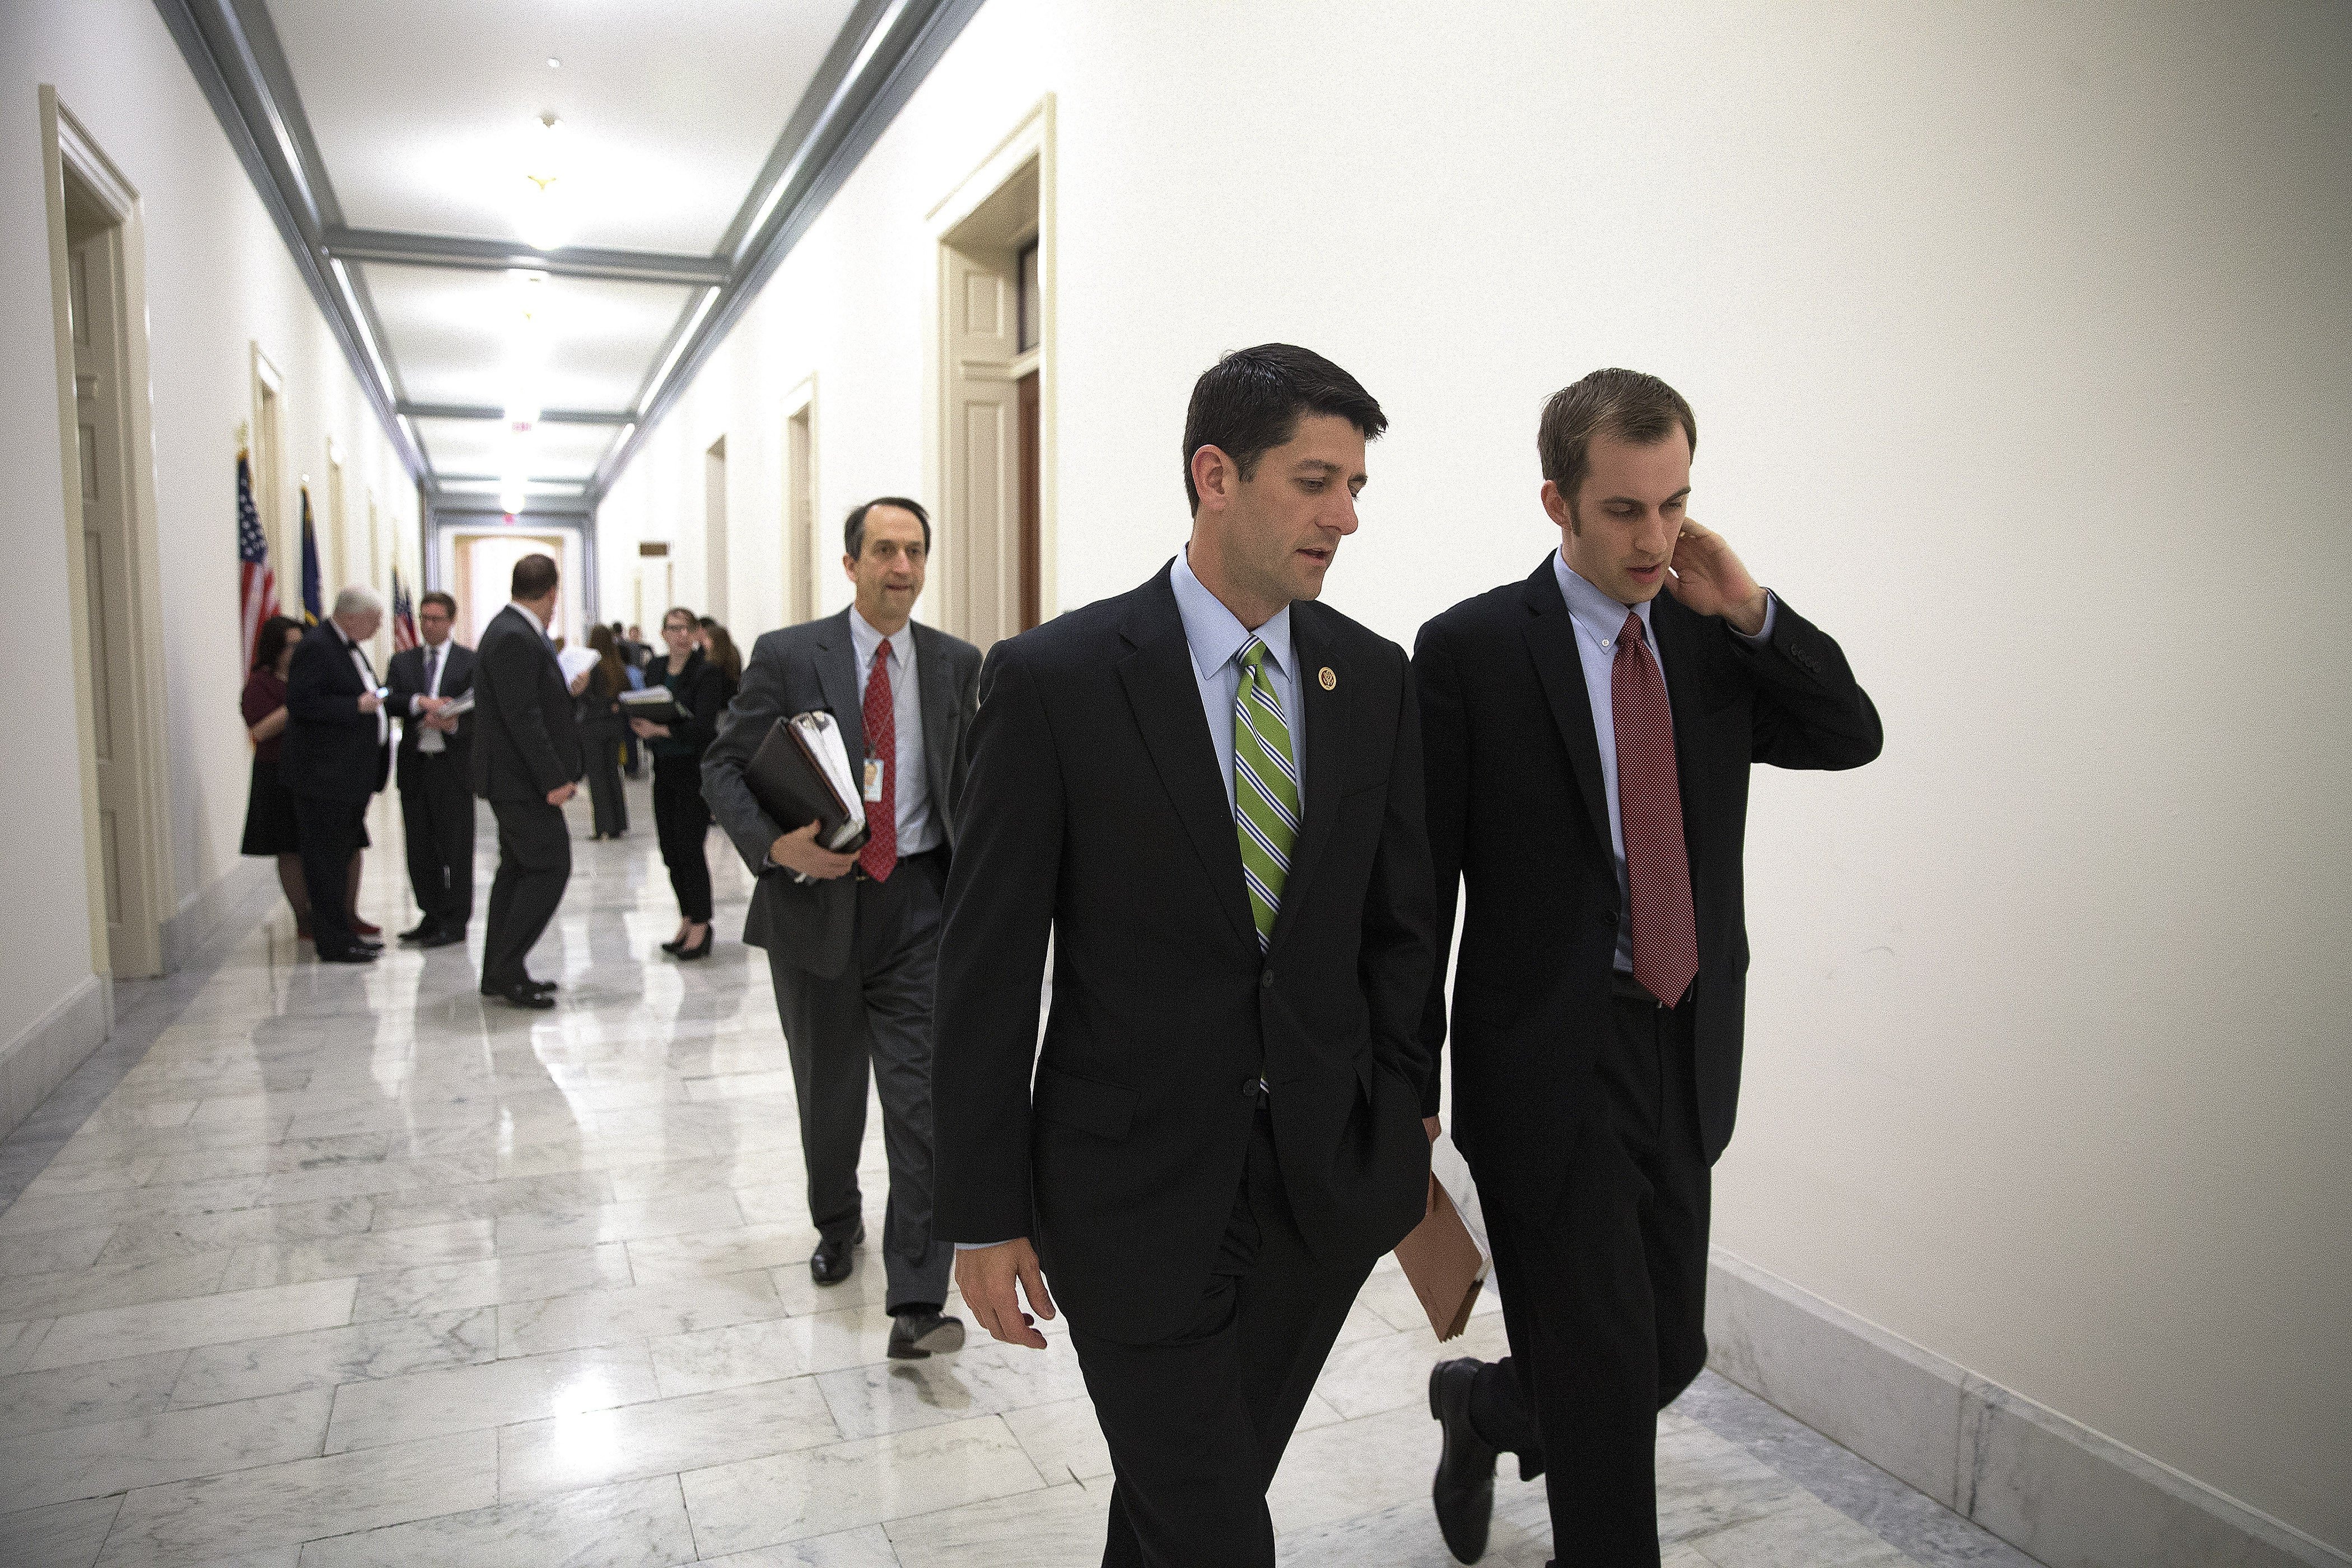 Rep. Paul Ryan, chairman of the House Budget Committee, walks with his staff following a meeting on the newest Republican budget for 2015 on Capitol Hill.